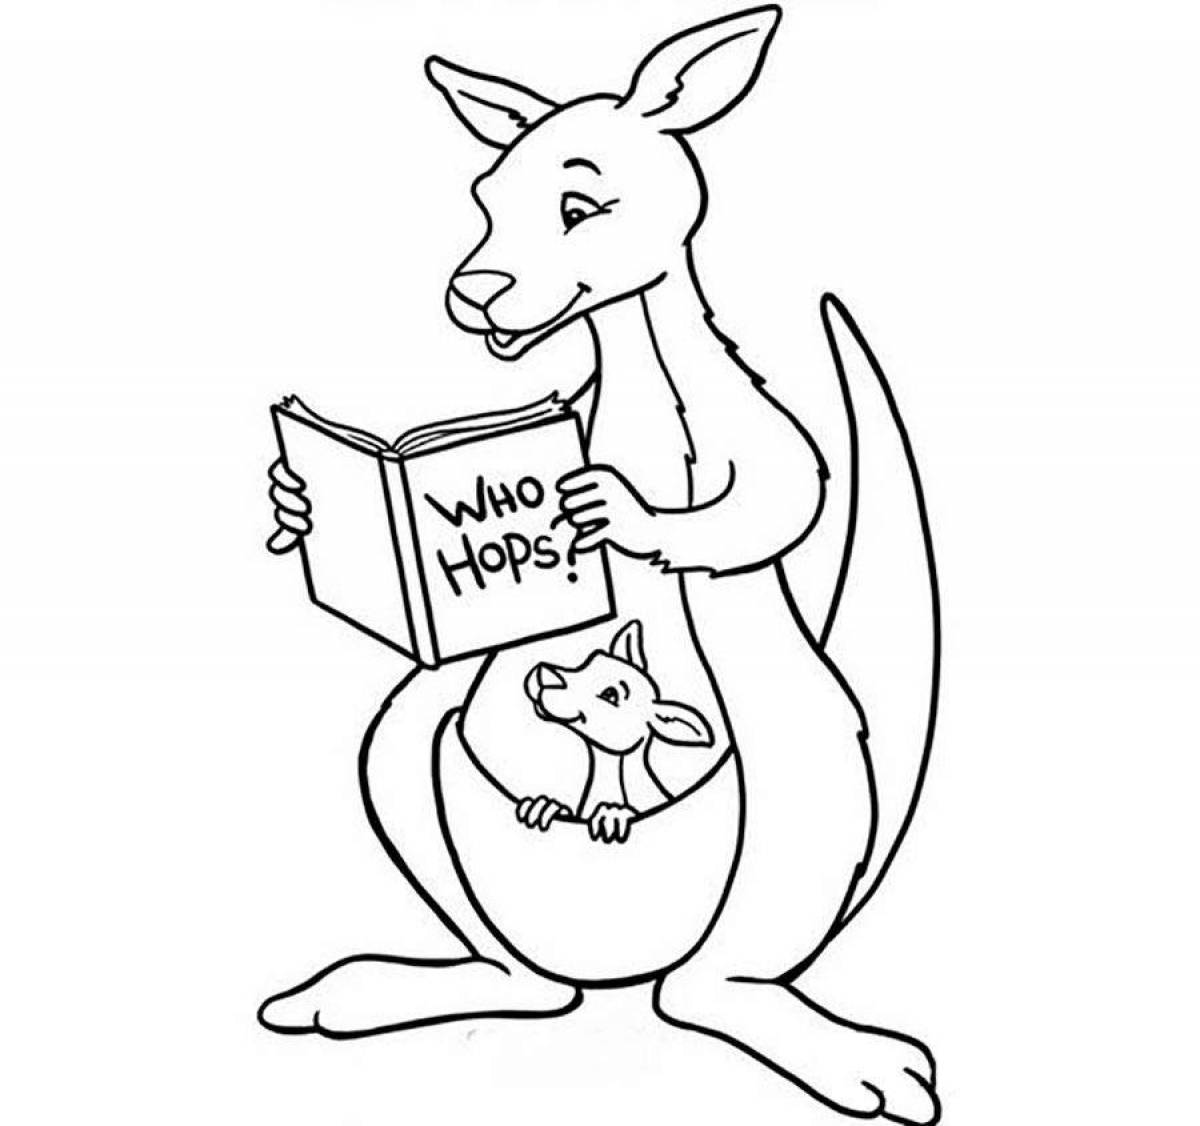 Awesome kangaroo coloring pages for kids